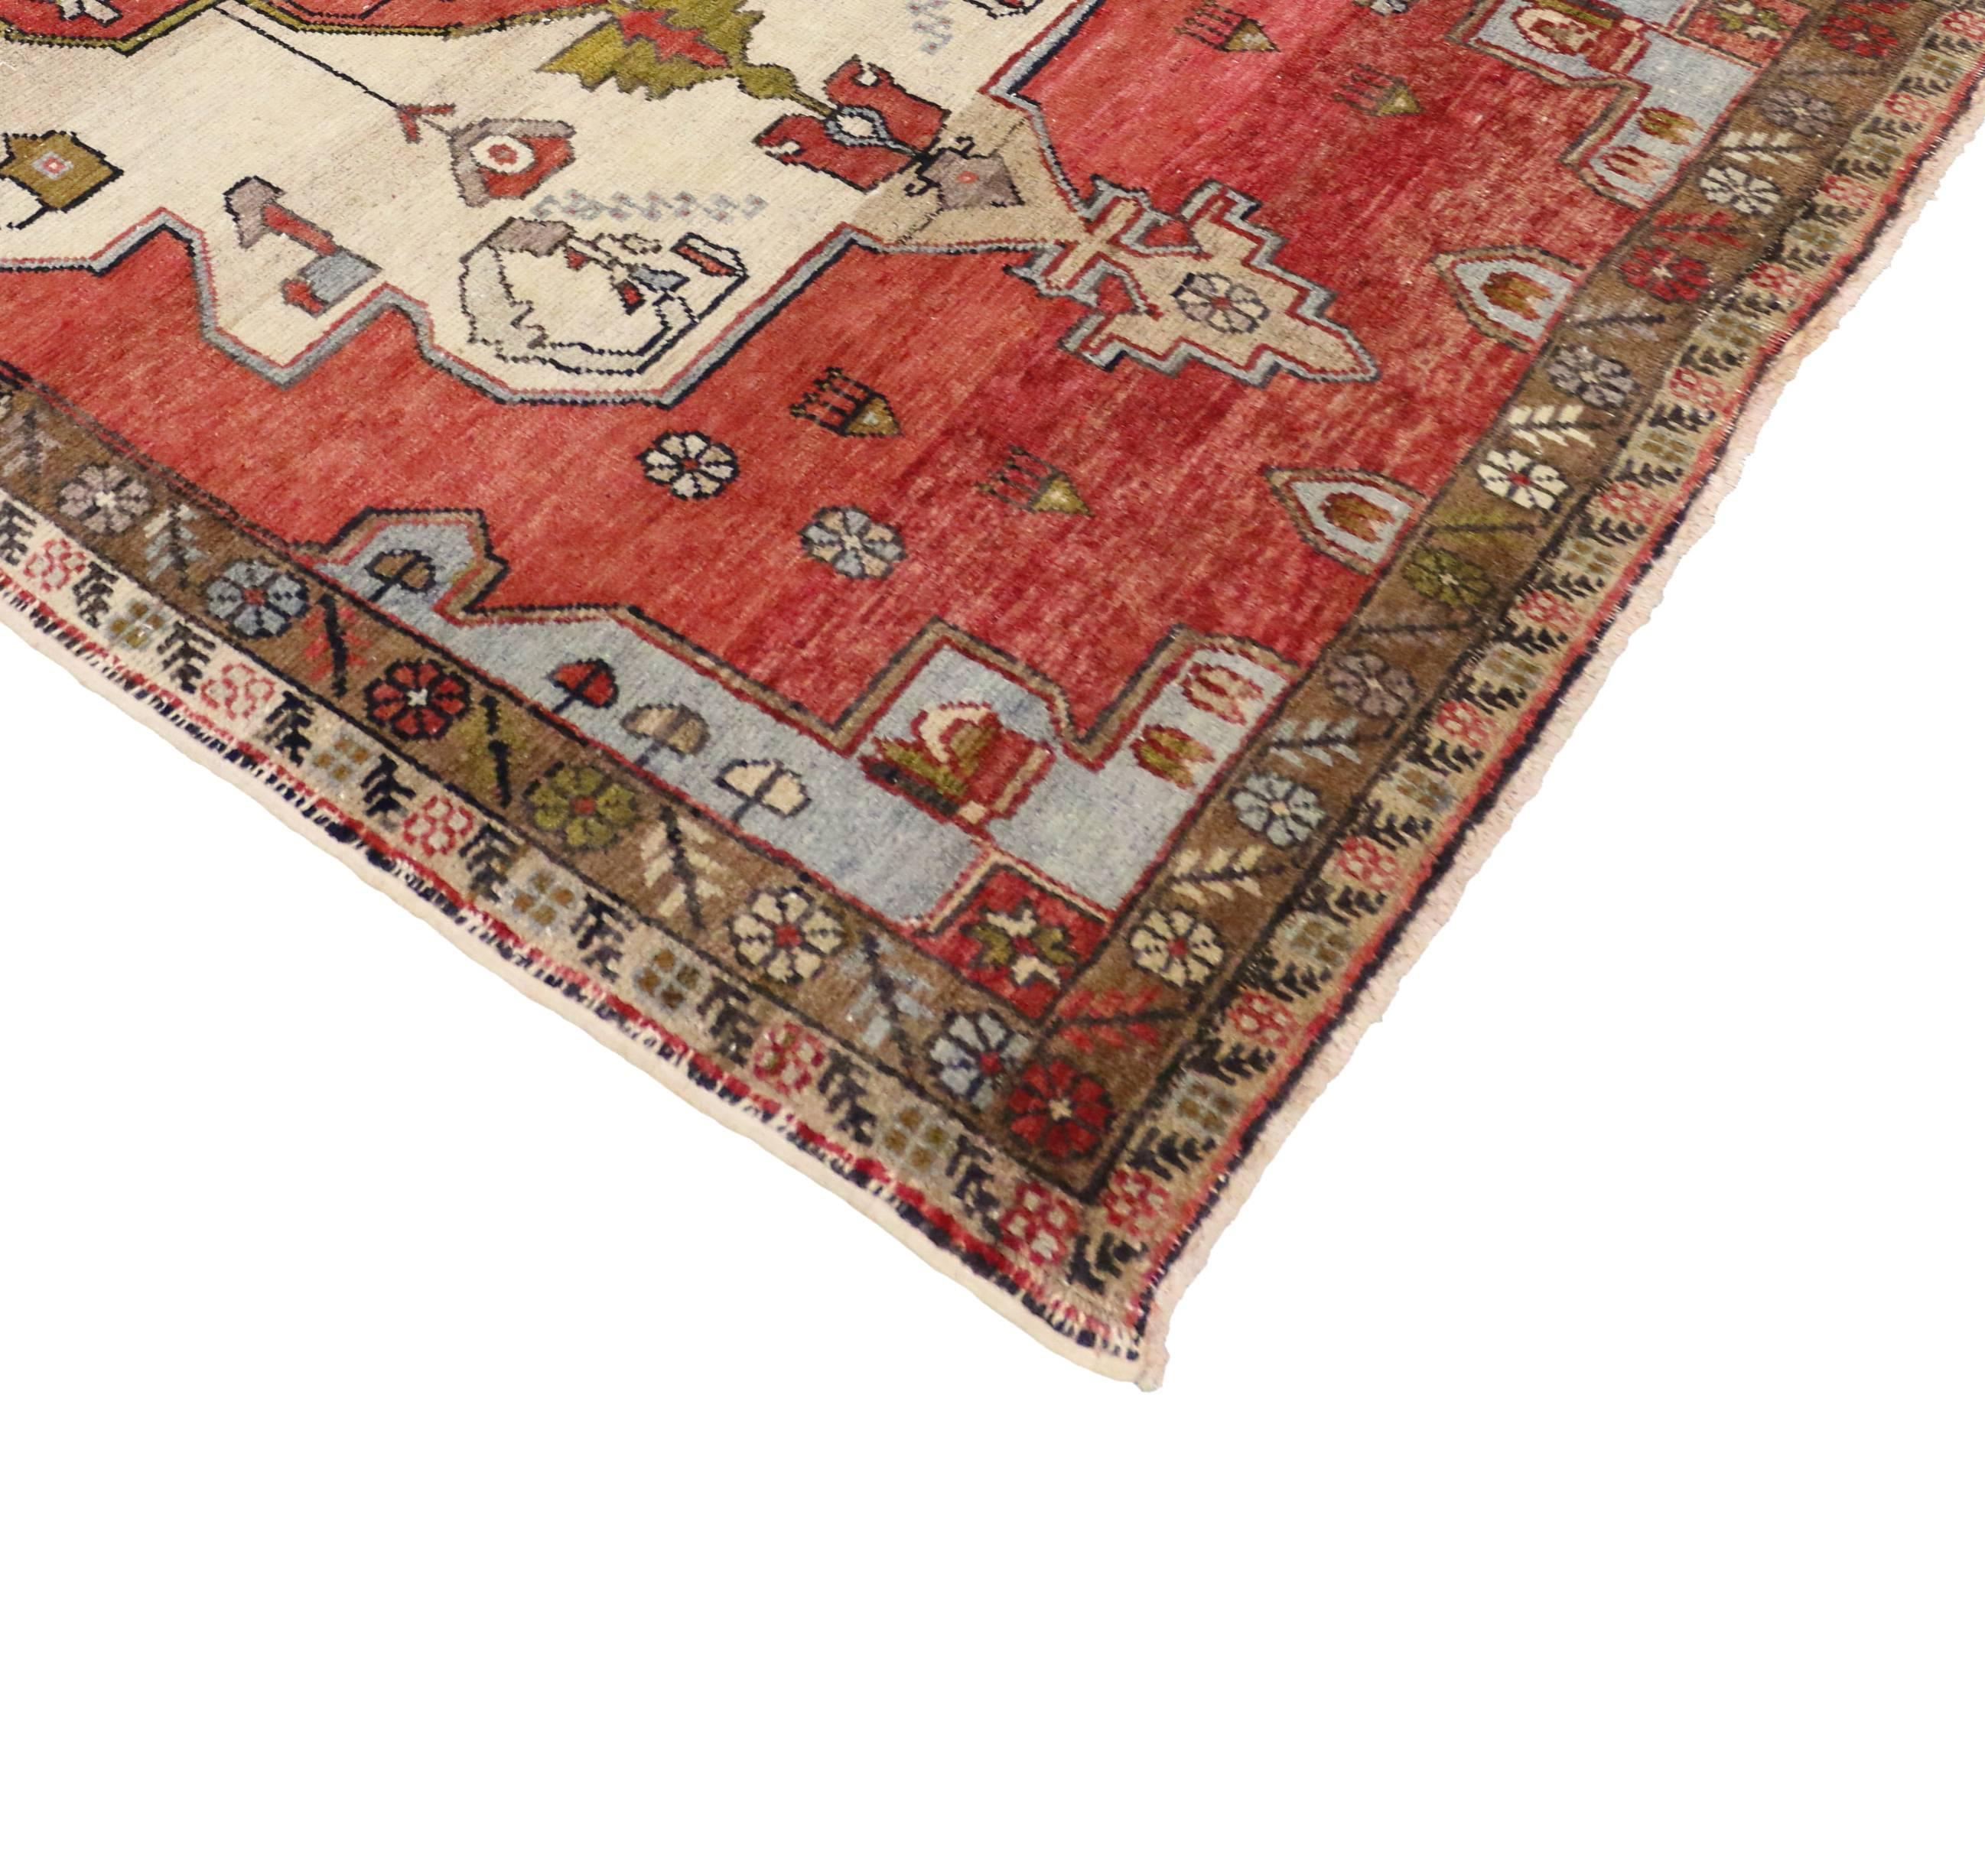 Hand-knotted wool vintage Turkish Oushak gallery rug featuring a red centre medallion in an open ivory and red field with rich waves of abrash. Rendered in a refined palette of vibrant colors: red, ivory, green, slate blue, gray, brown and beige.